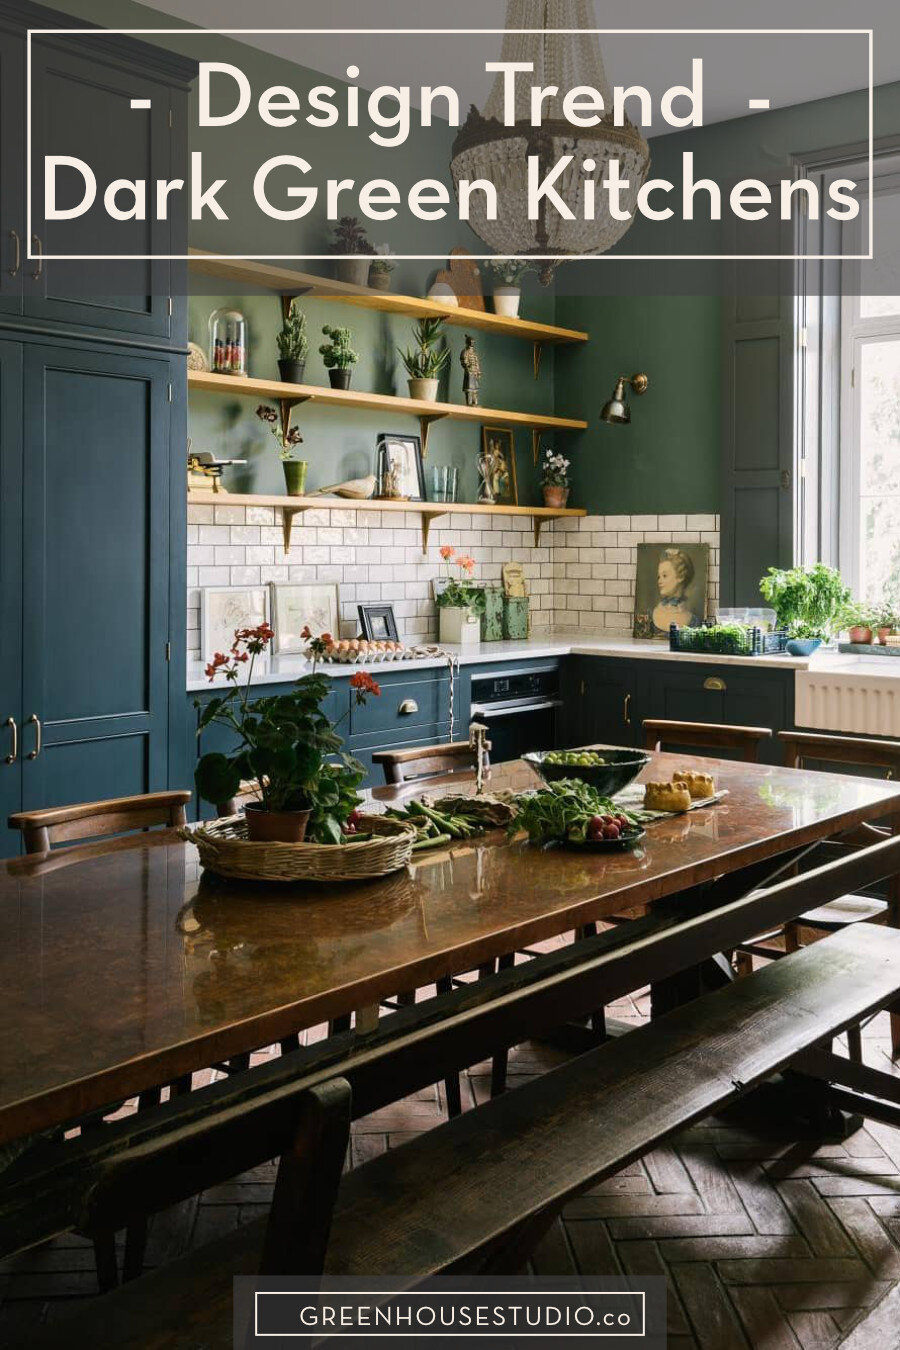 Dark Green Kitchens Kitchen Trends, What Color Cabinets Go With Dark Green Countertops